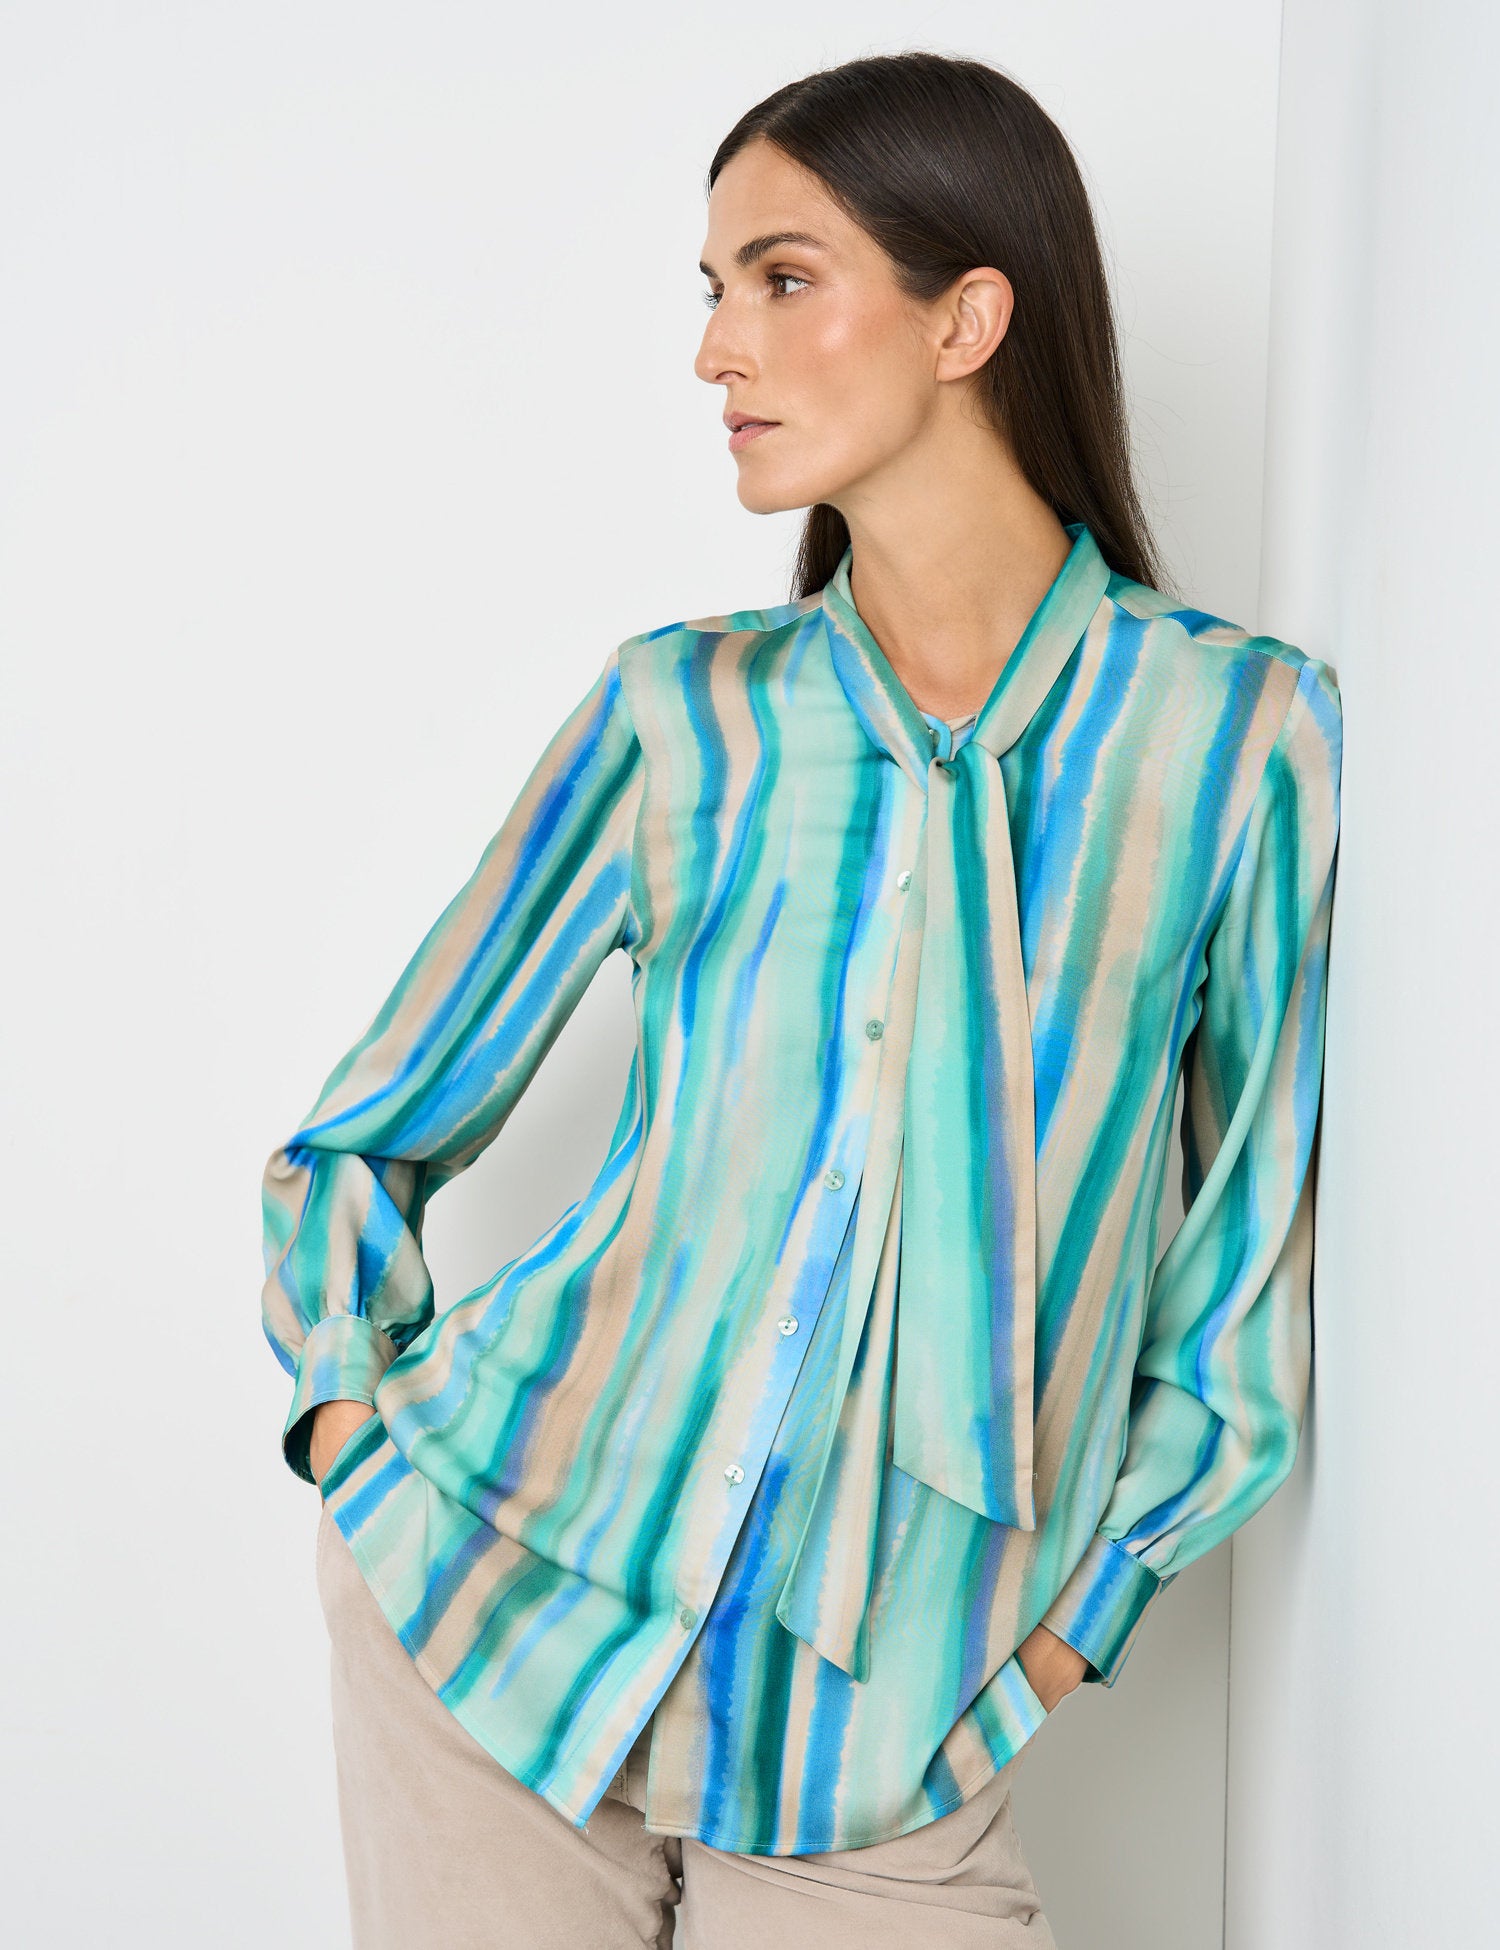 Flowing Blouse With A Bow Collar_160068-66456_5089_05